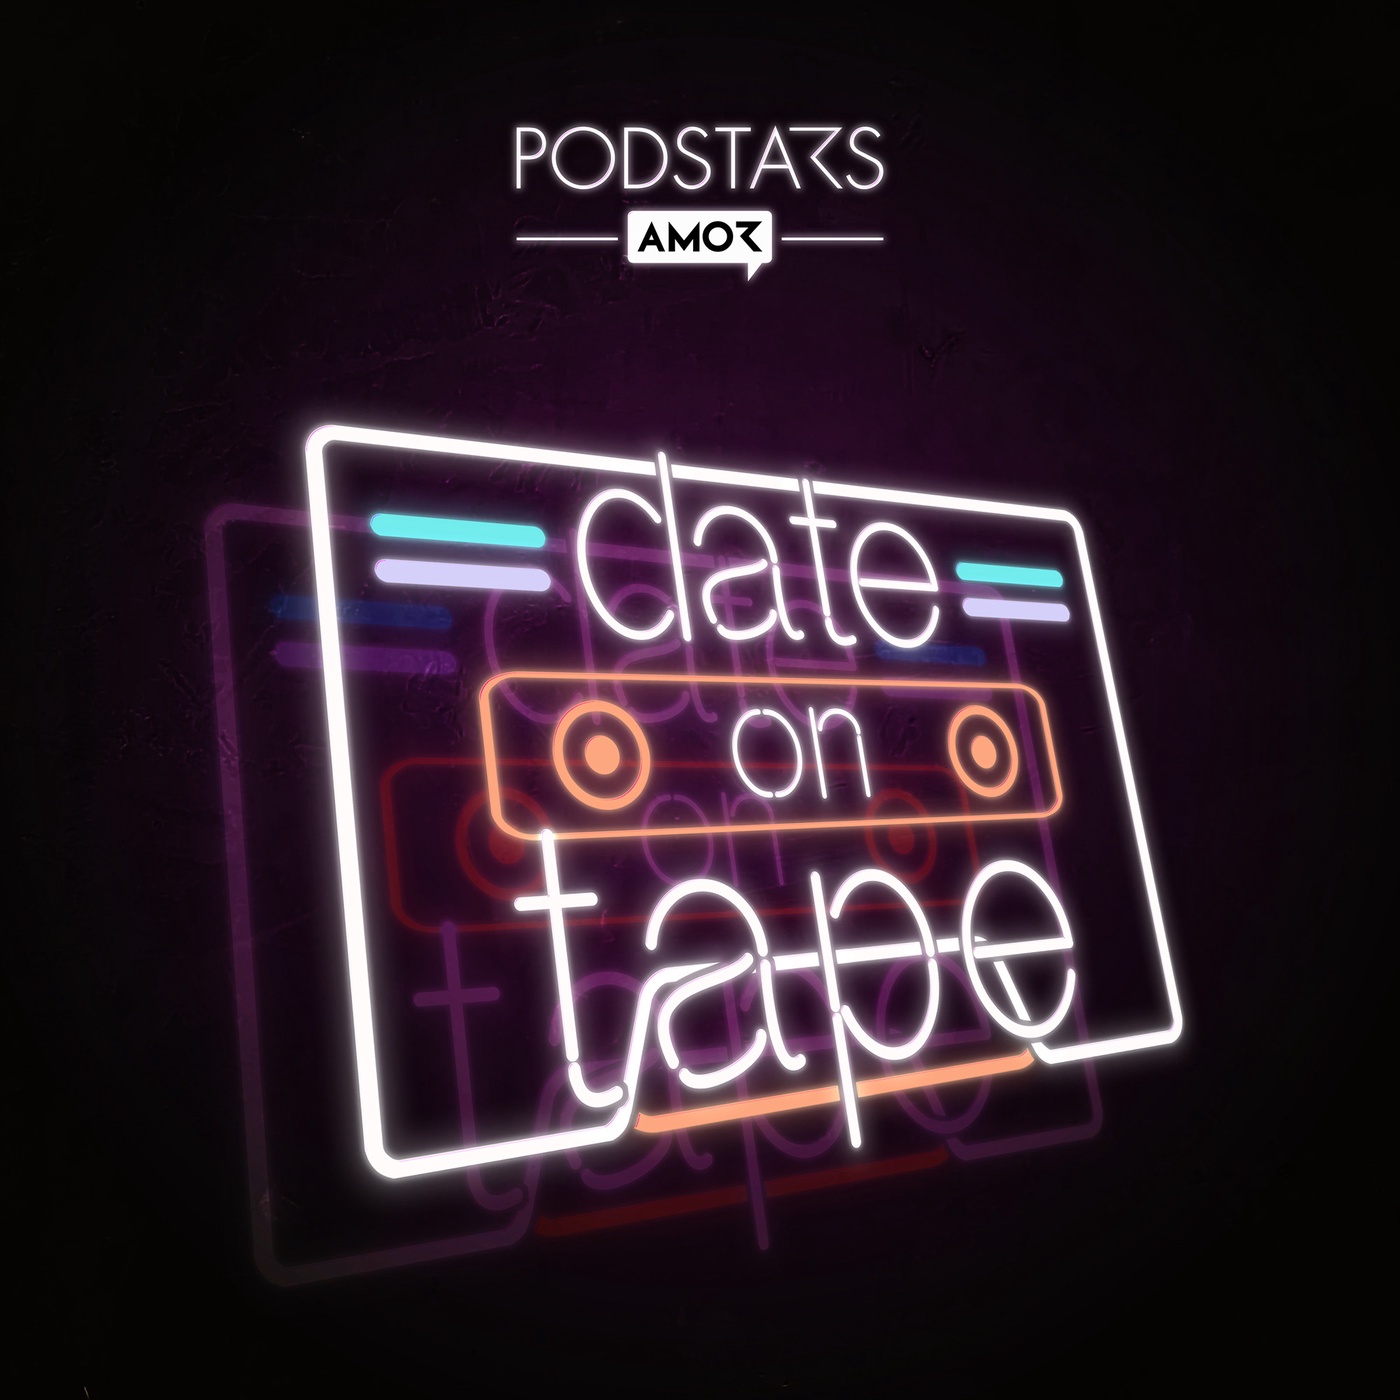 Date on Tape